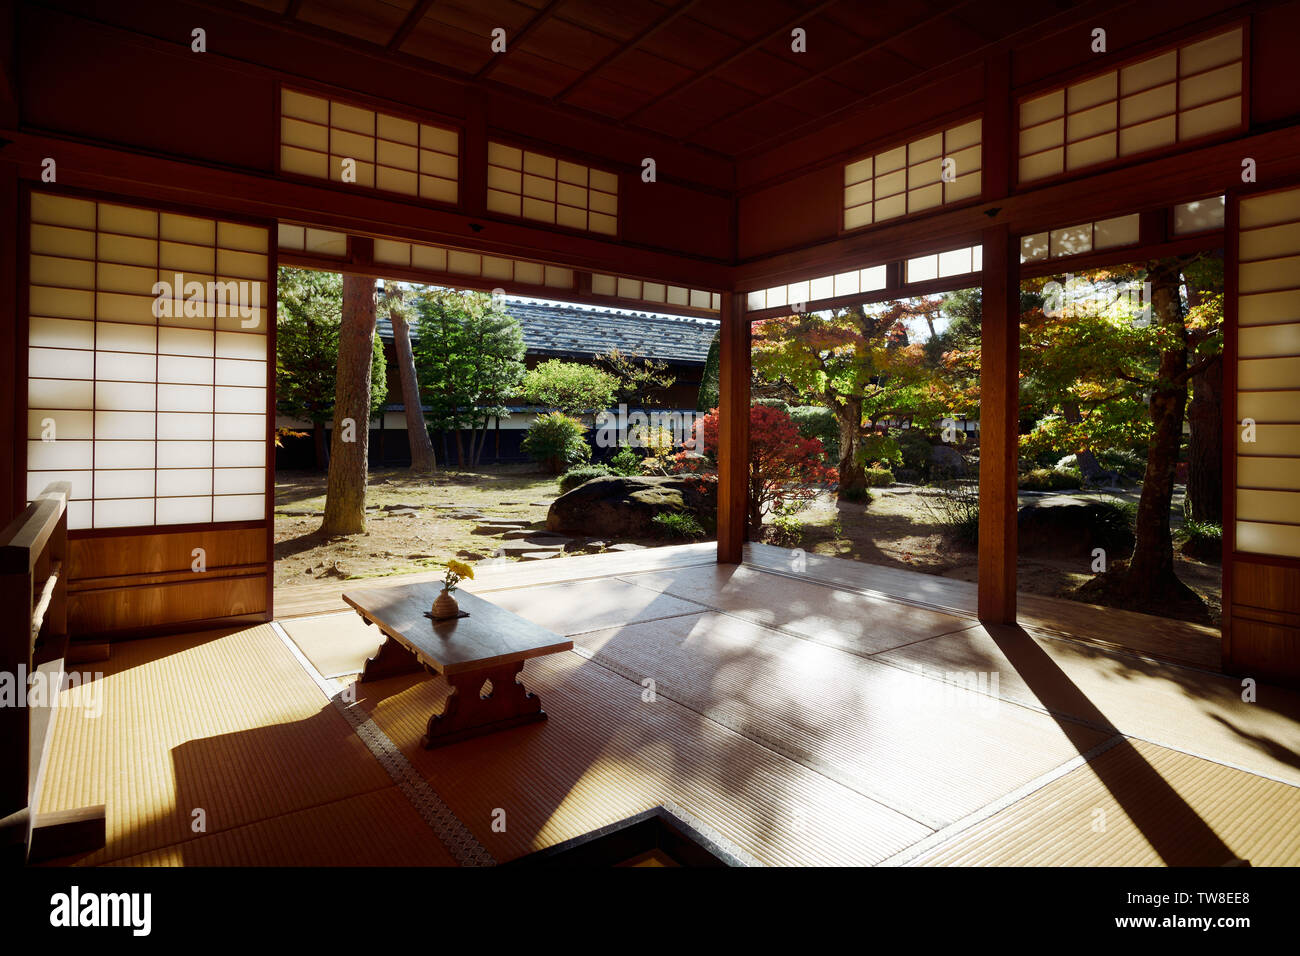 Japanese Edo period building interior. Lit with sunlight traditional room of Takayama Jin'ya, historic house, with an autumn garden view. Stock Photo